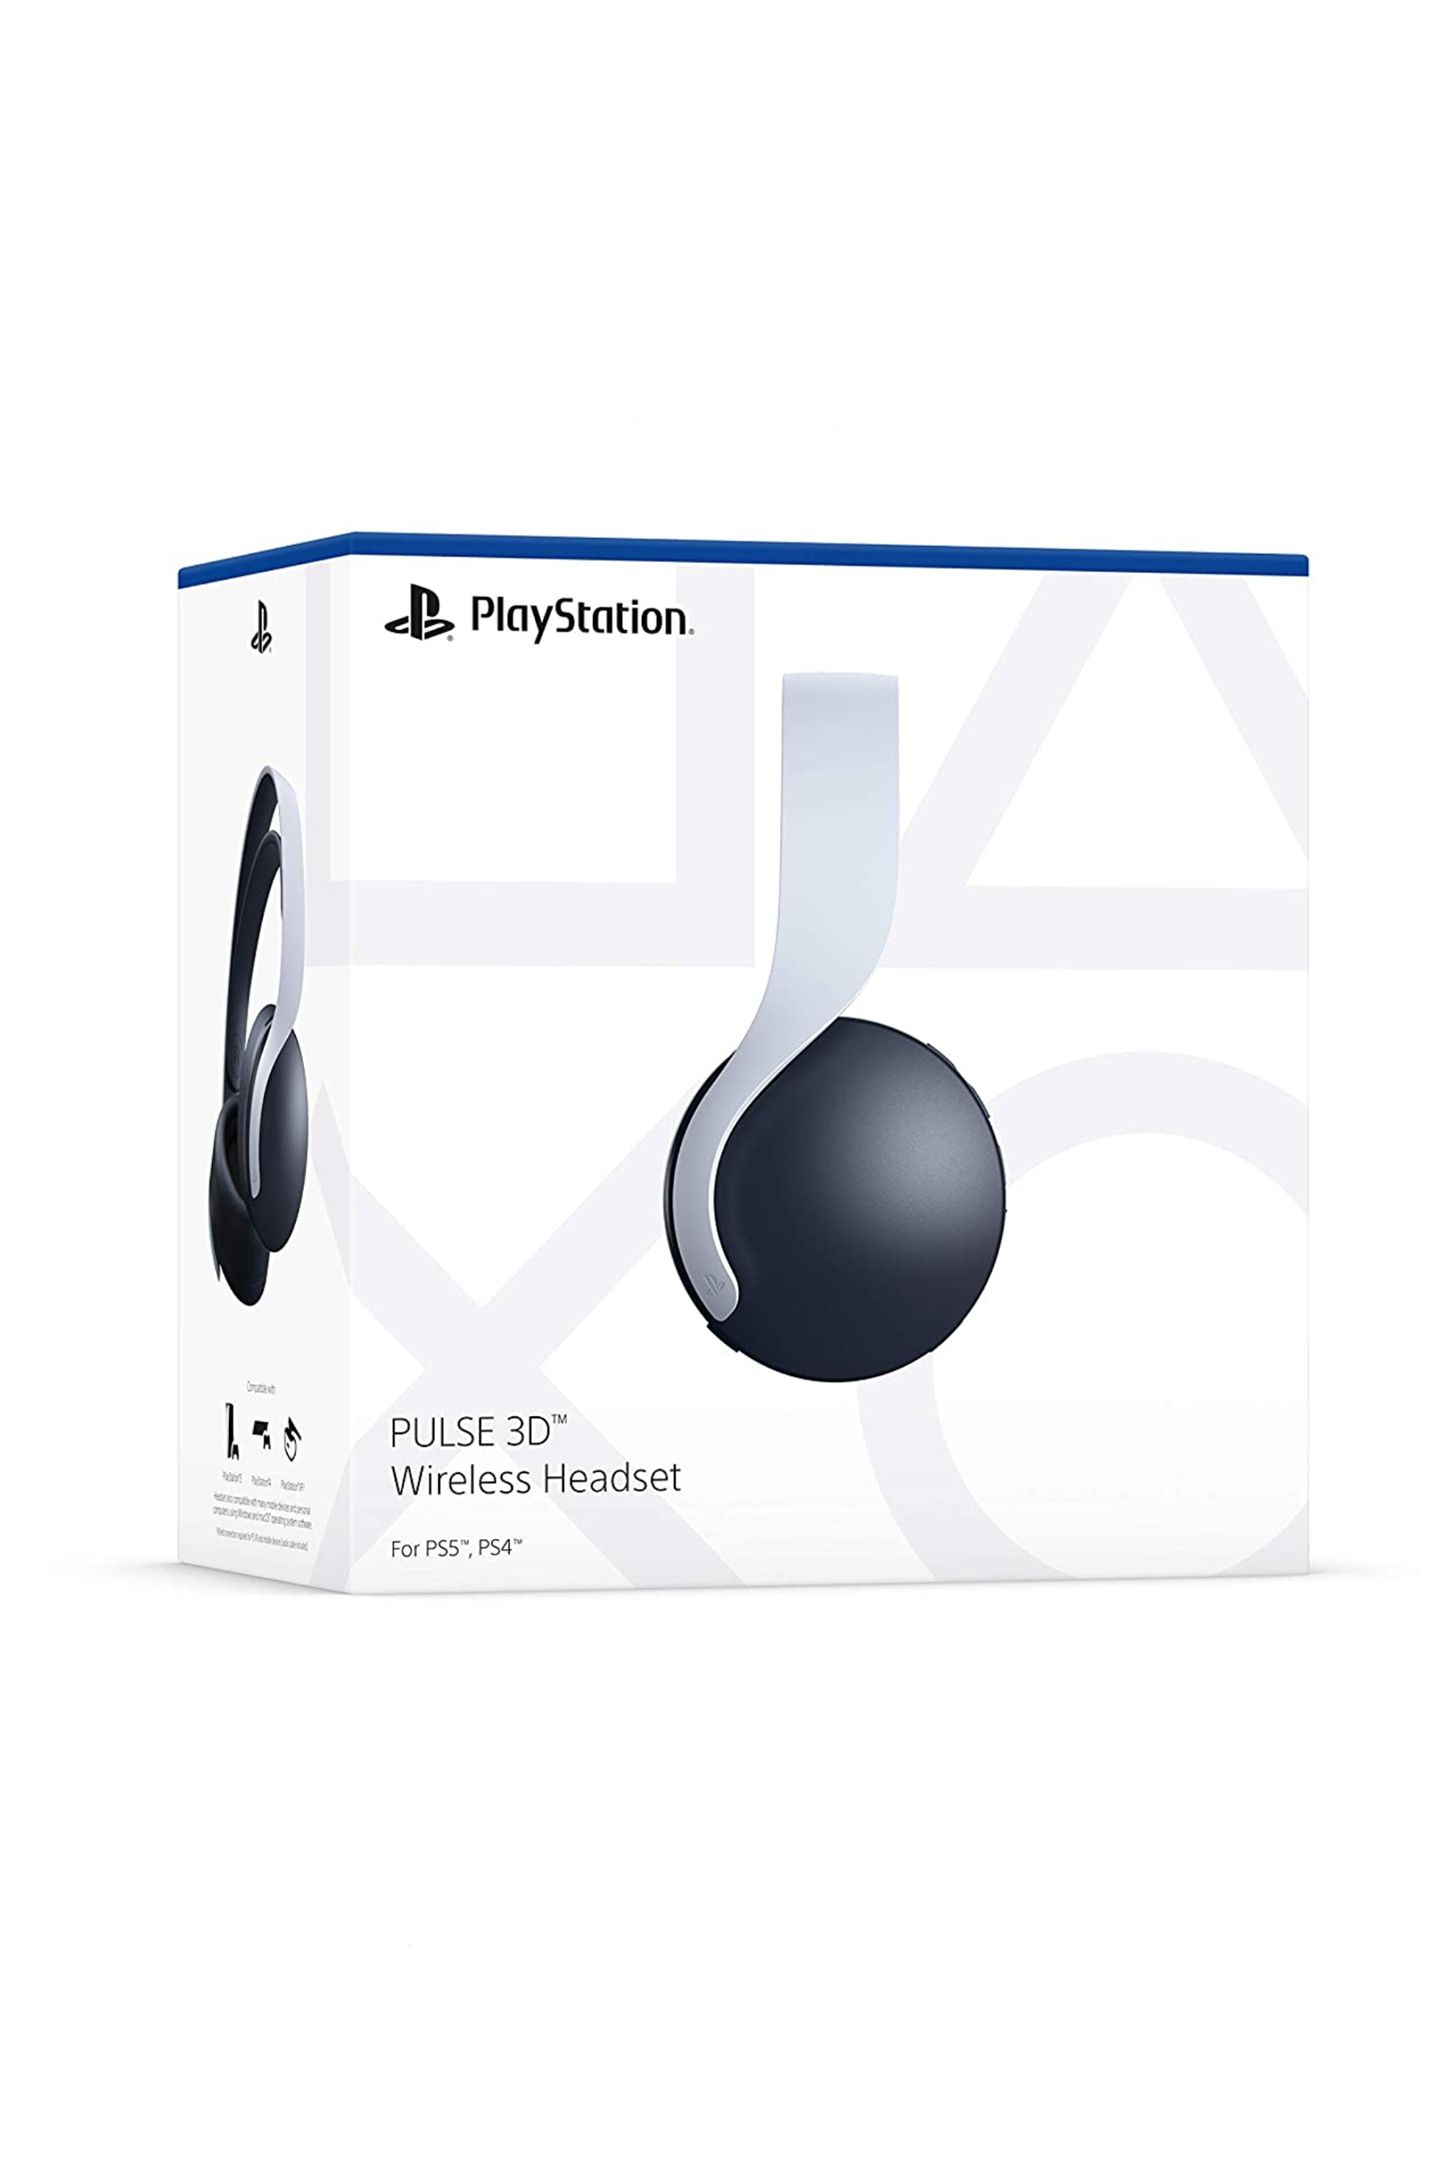 PlayStation PULSE 3D Wireless Headset cropped